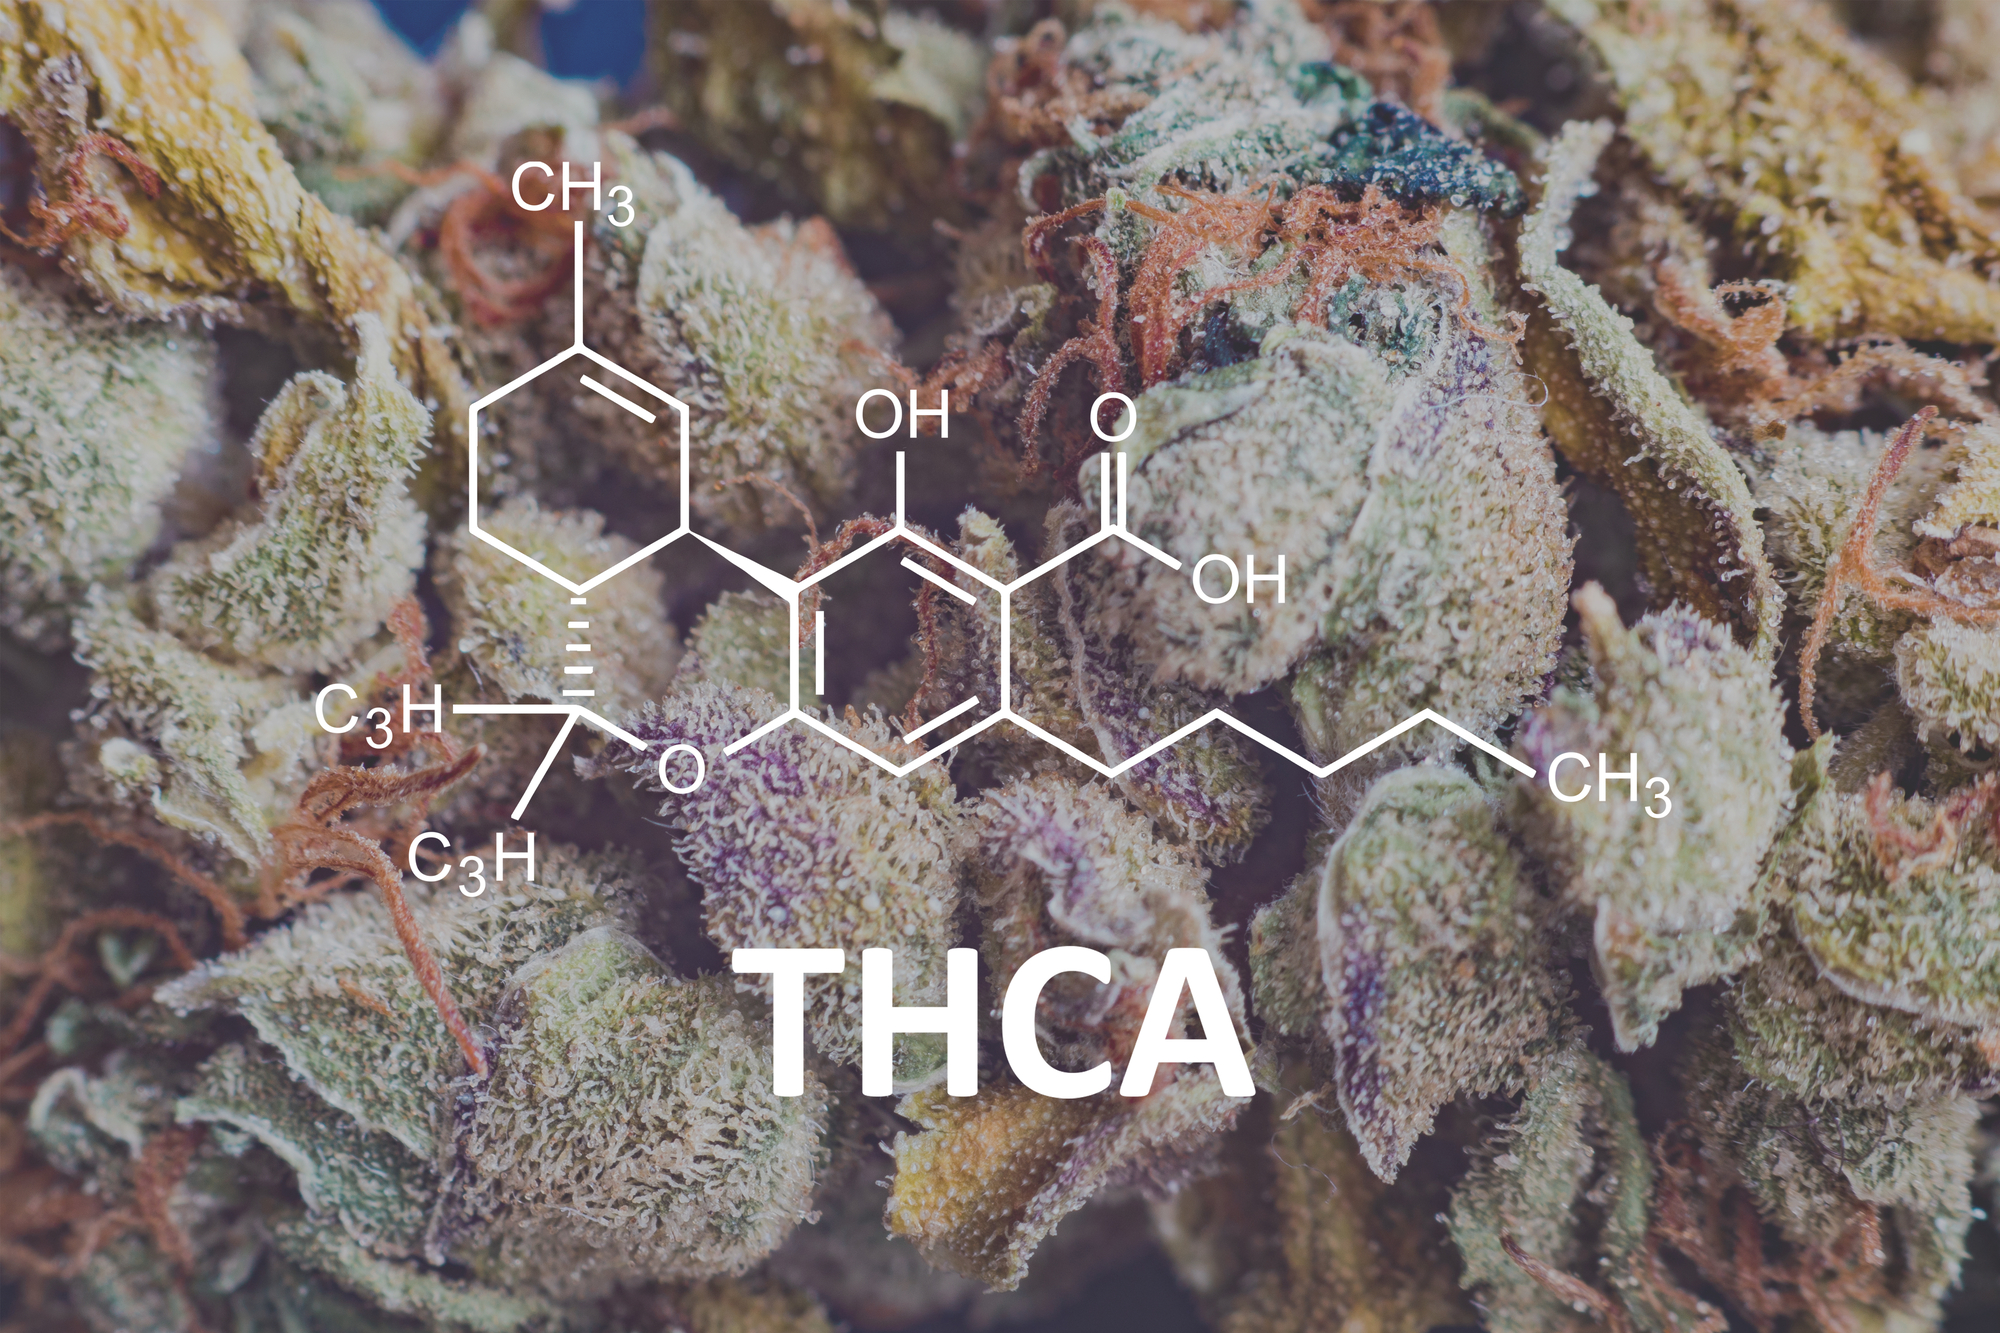 What is thcA,